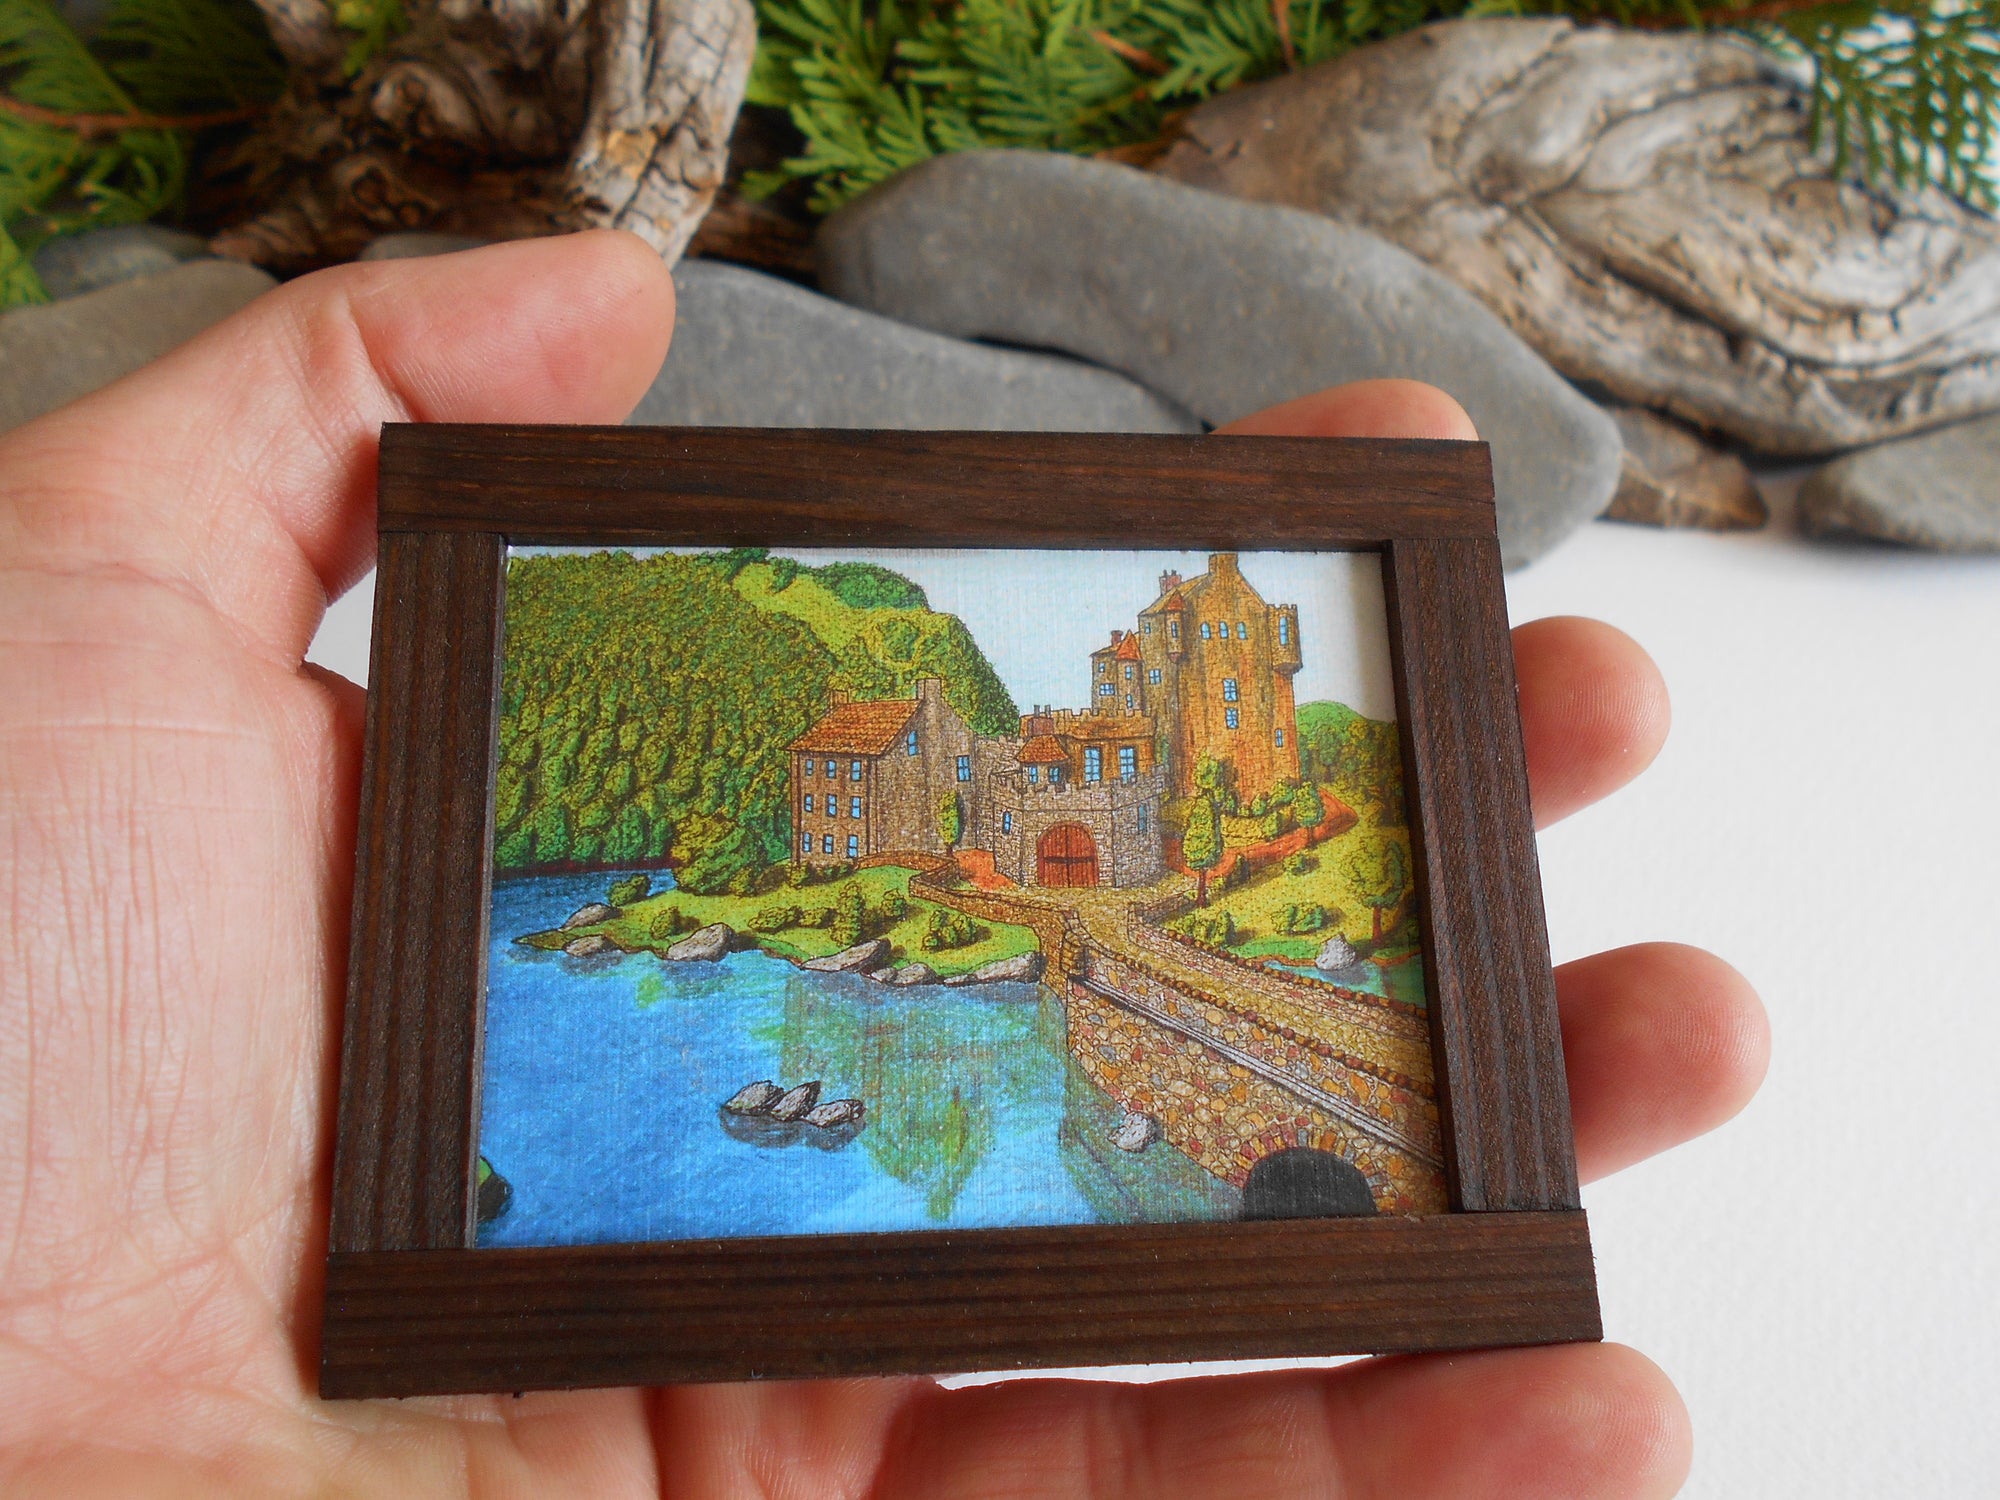 Miniature art framed with real pinewood- mini 'painting' artwork of Eilean Donan Castle for dollhouse or for miniature collectors- handmade miniature dollhouse accessory